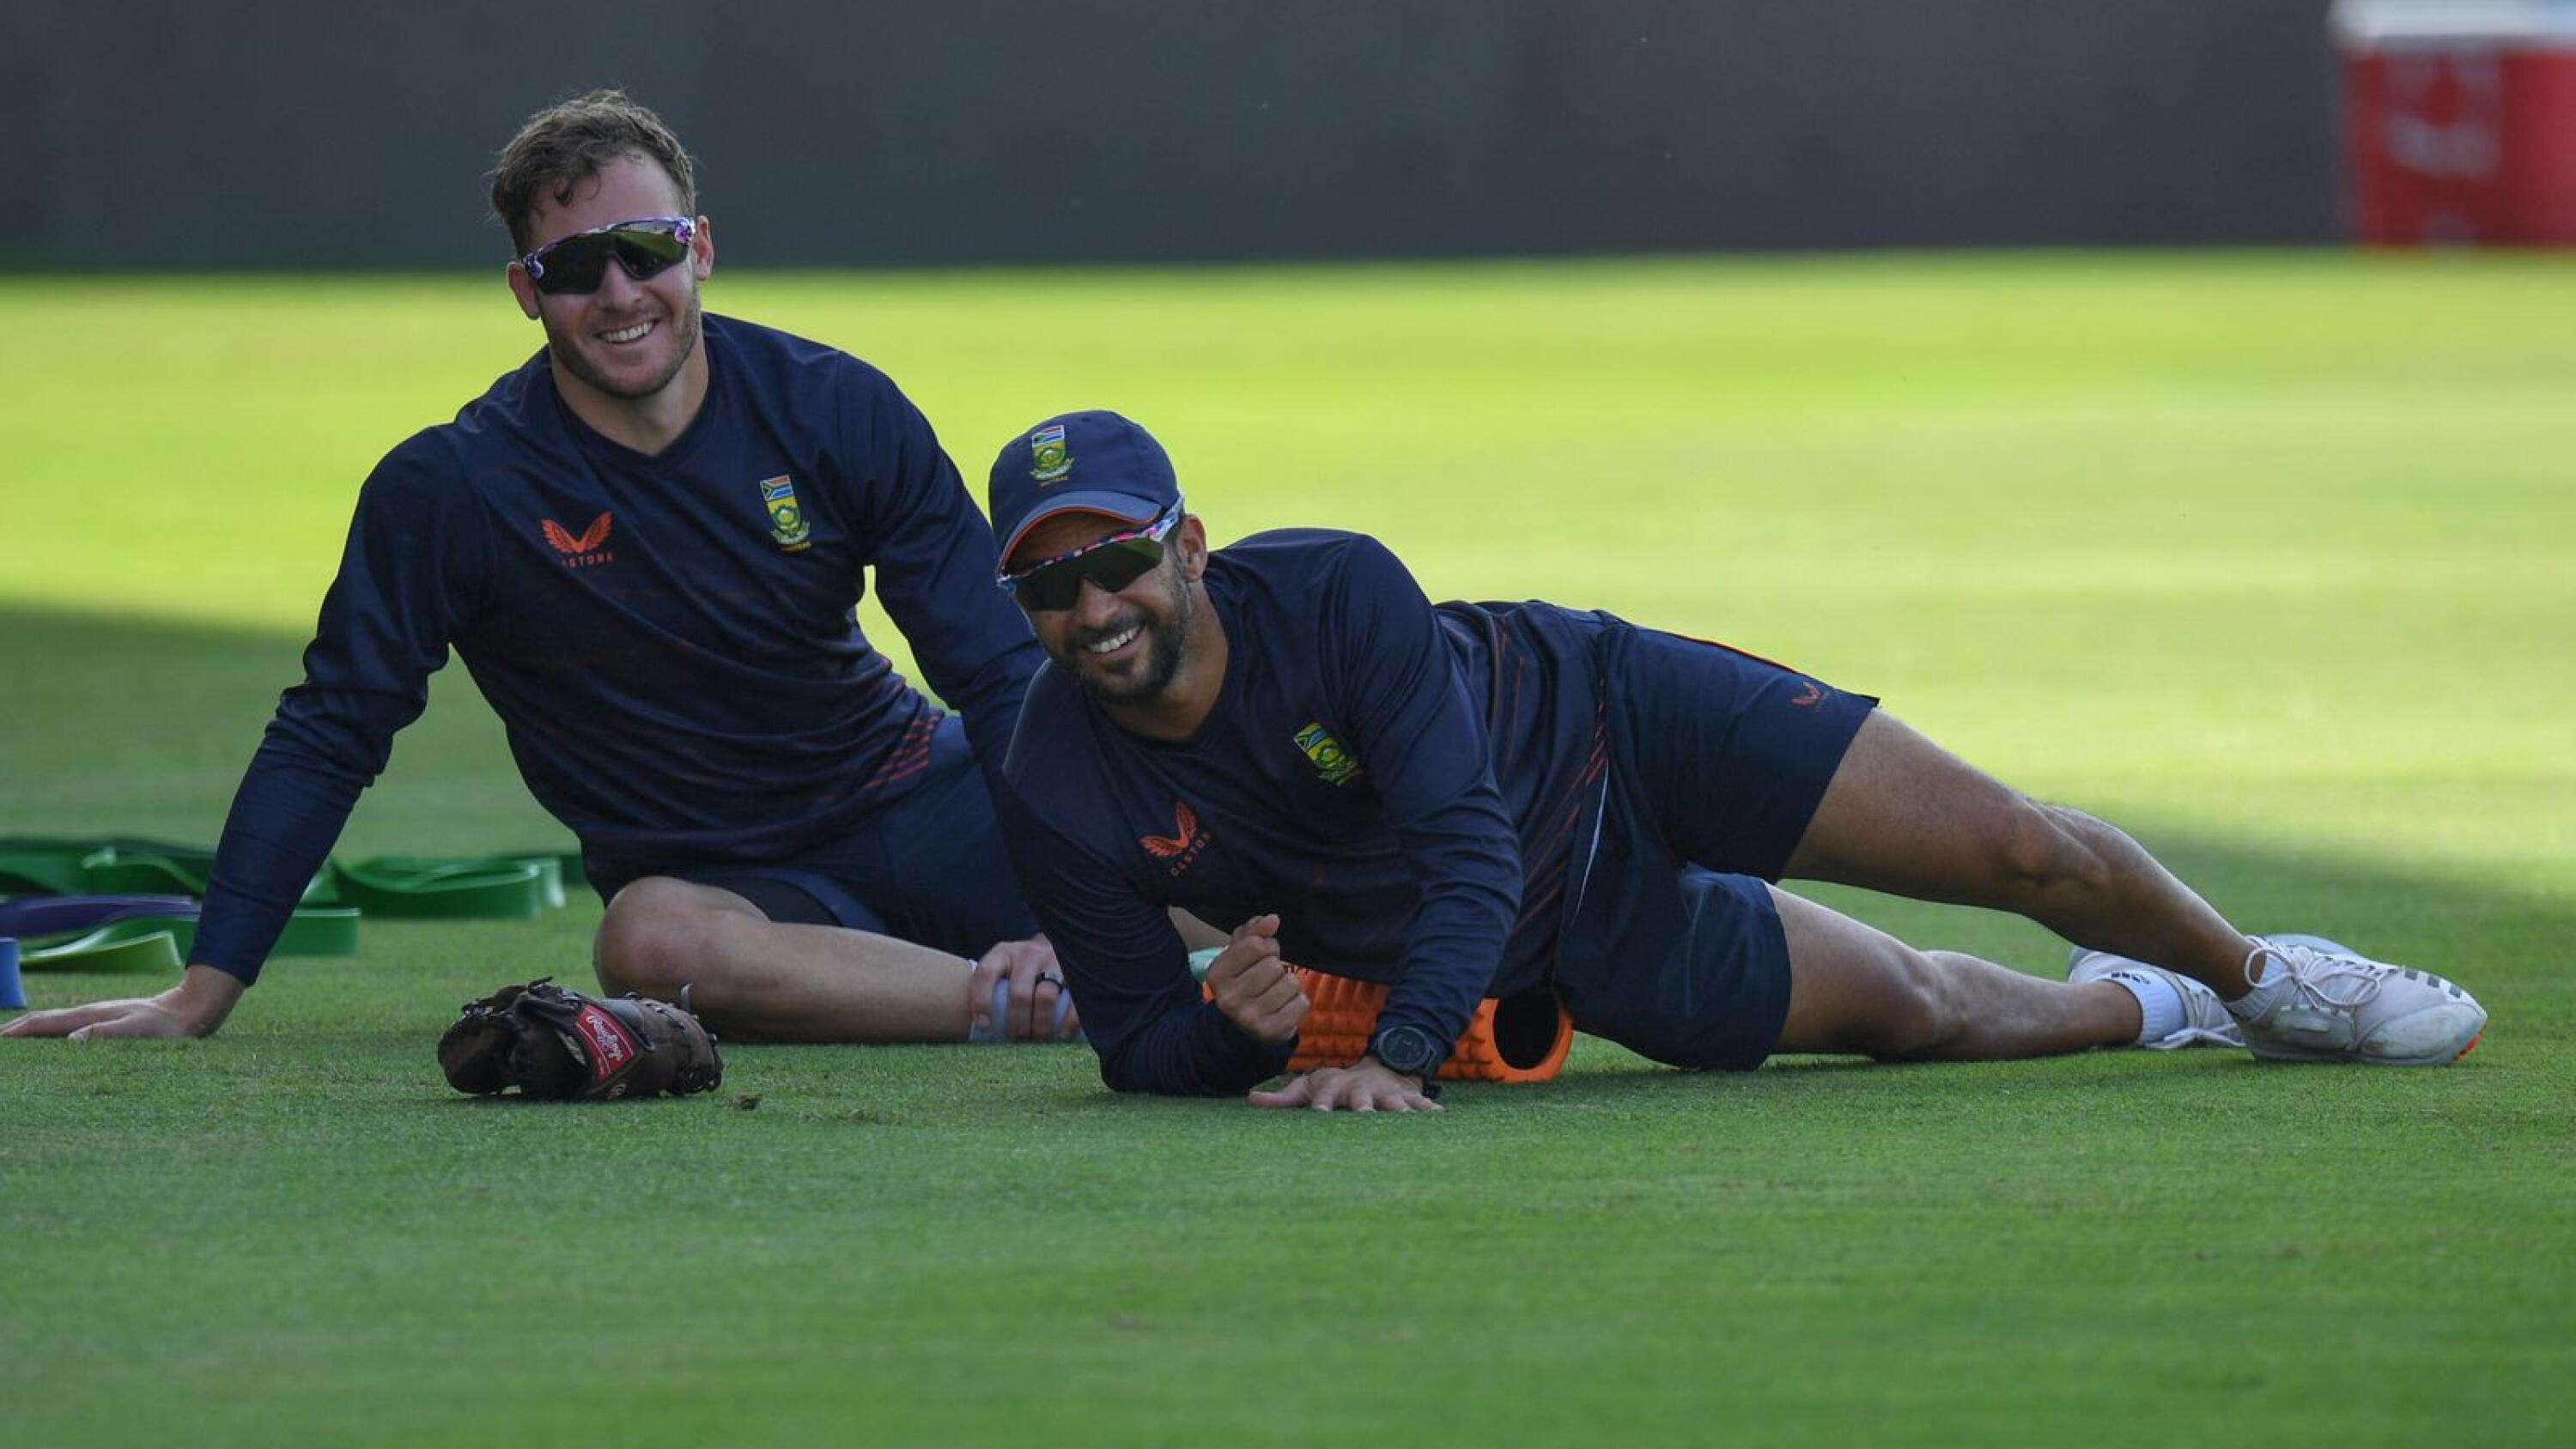 Proteas batter David Miller (L) and JP Duminy stretch during a training session ahead 